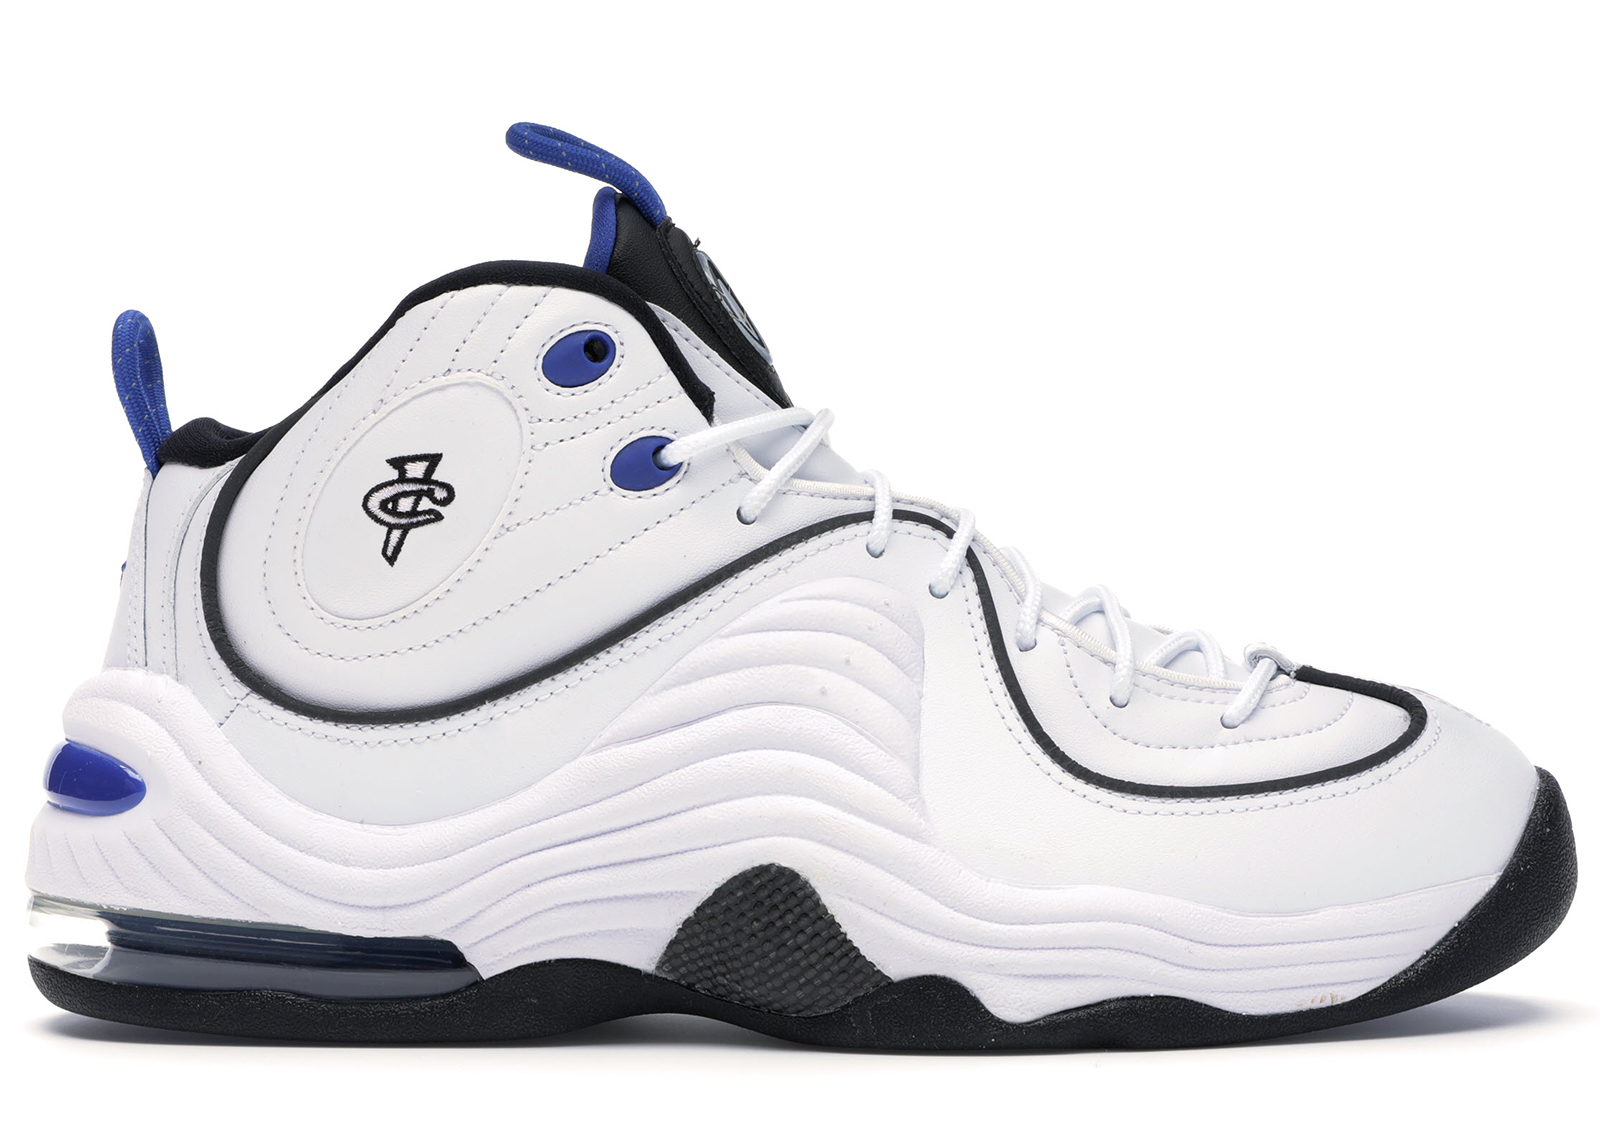 the penny hardaway shoes